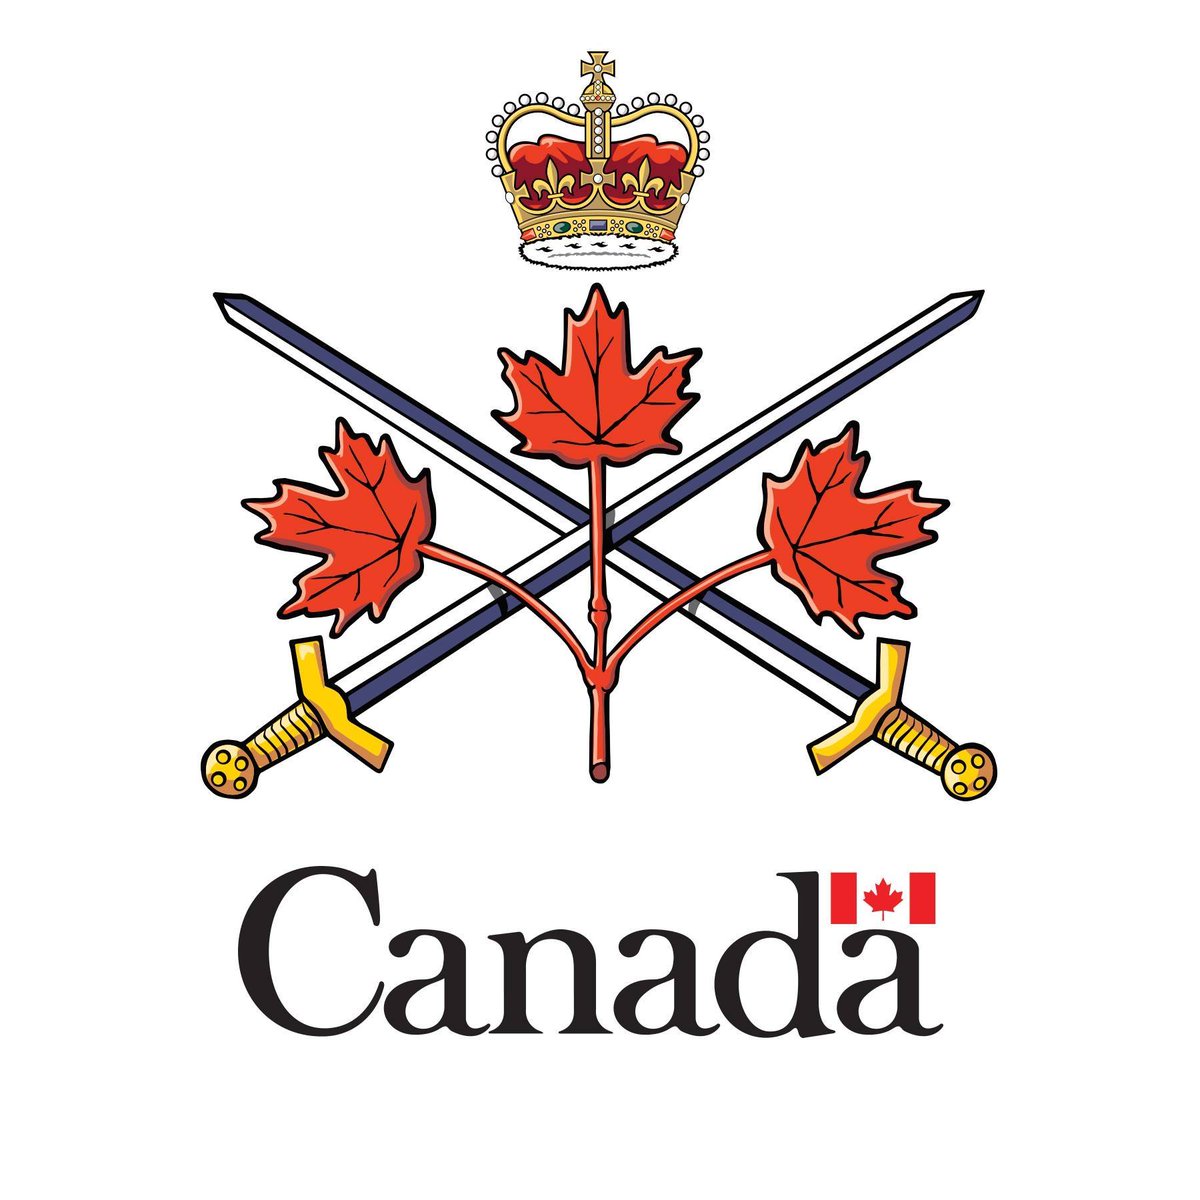 The Canadian Army has not changed its official logo. We remain proud of our official emblem. The icon launched today is a supplementary design only that will be used in the bottom left corner of certain communications products and in animations for videos.